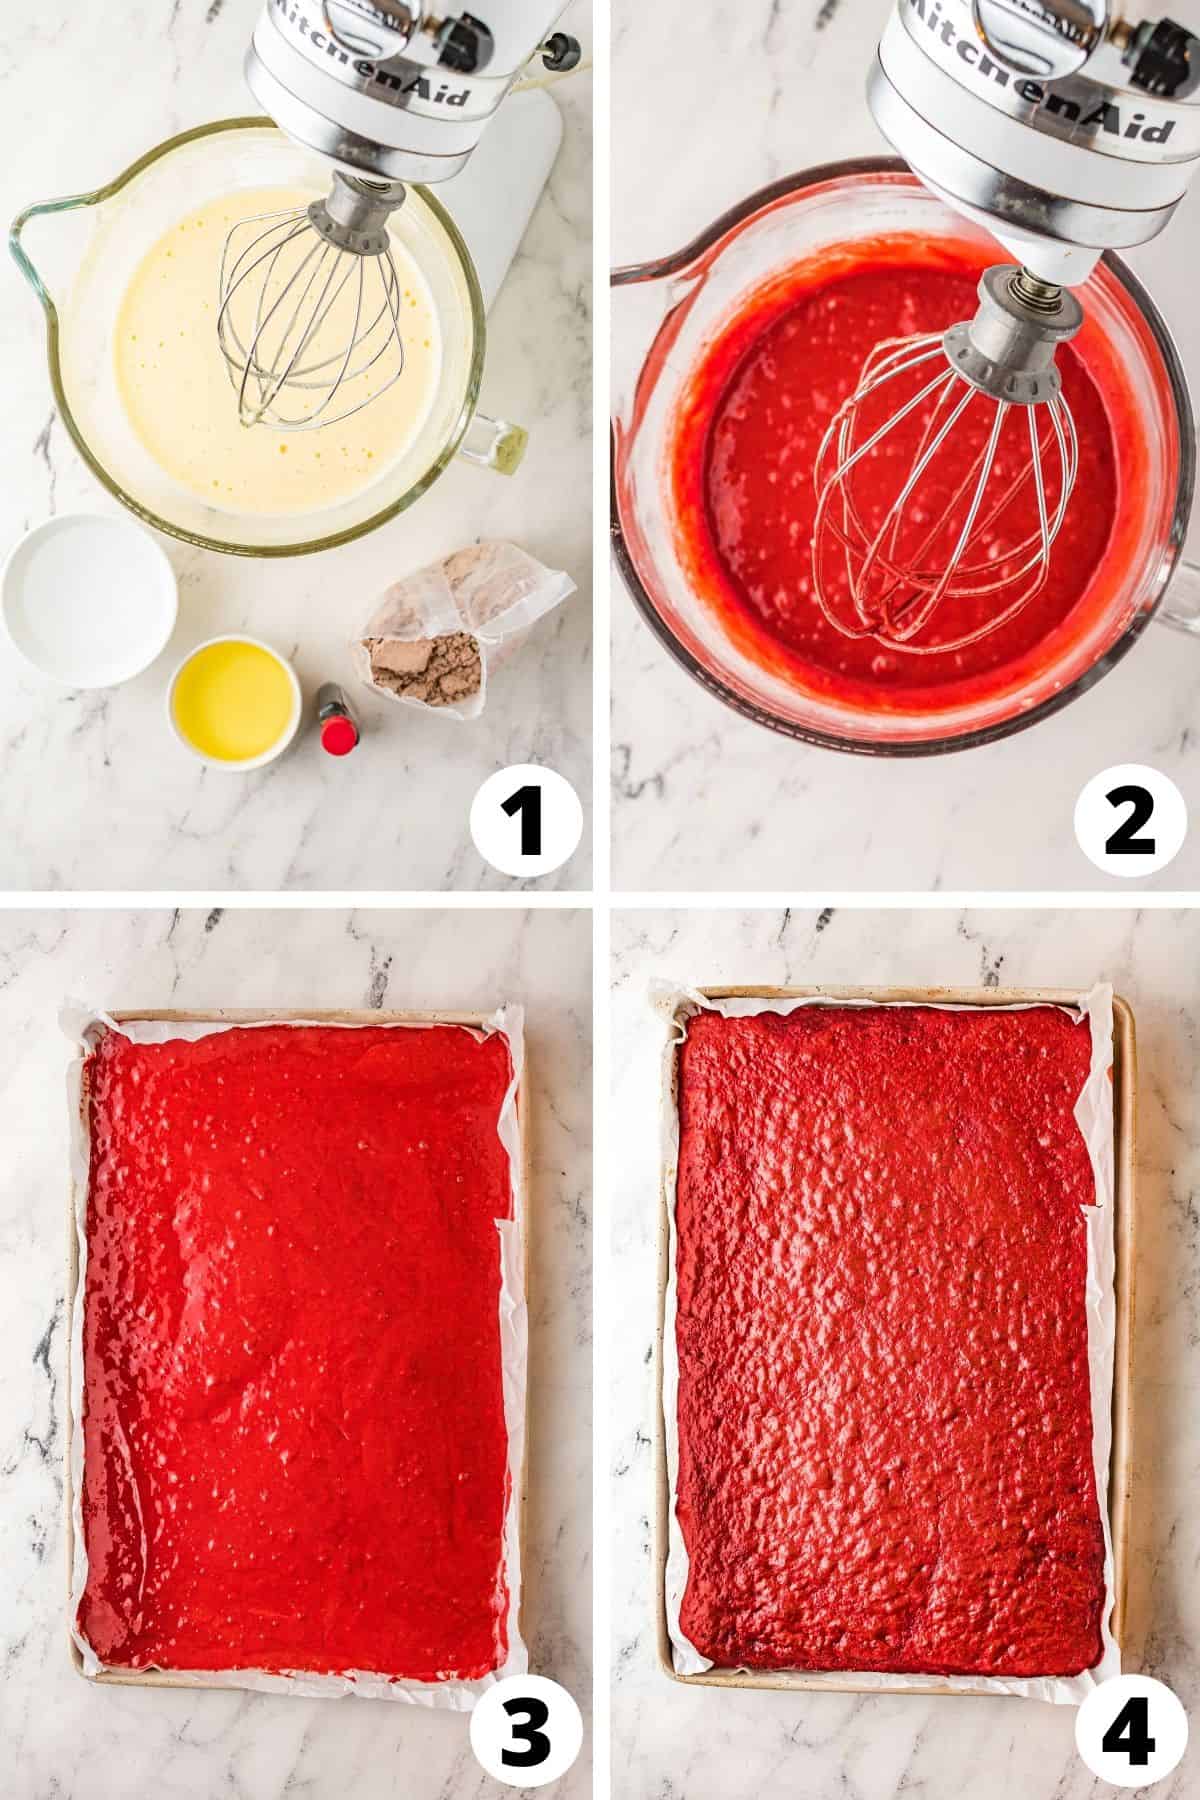 How to Make a Rolled Cake